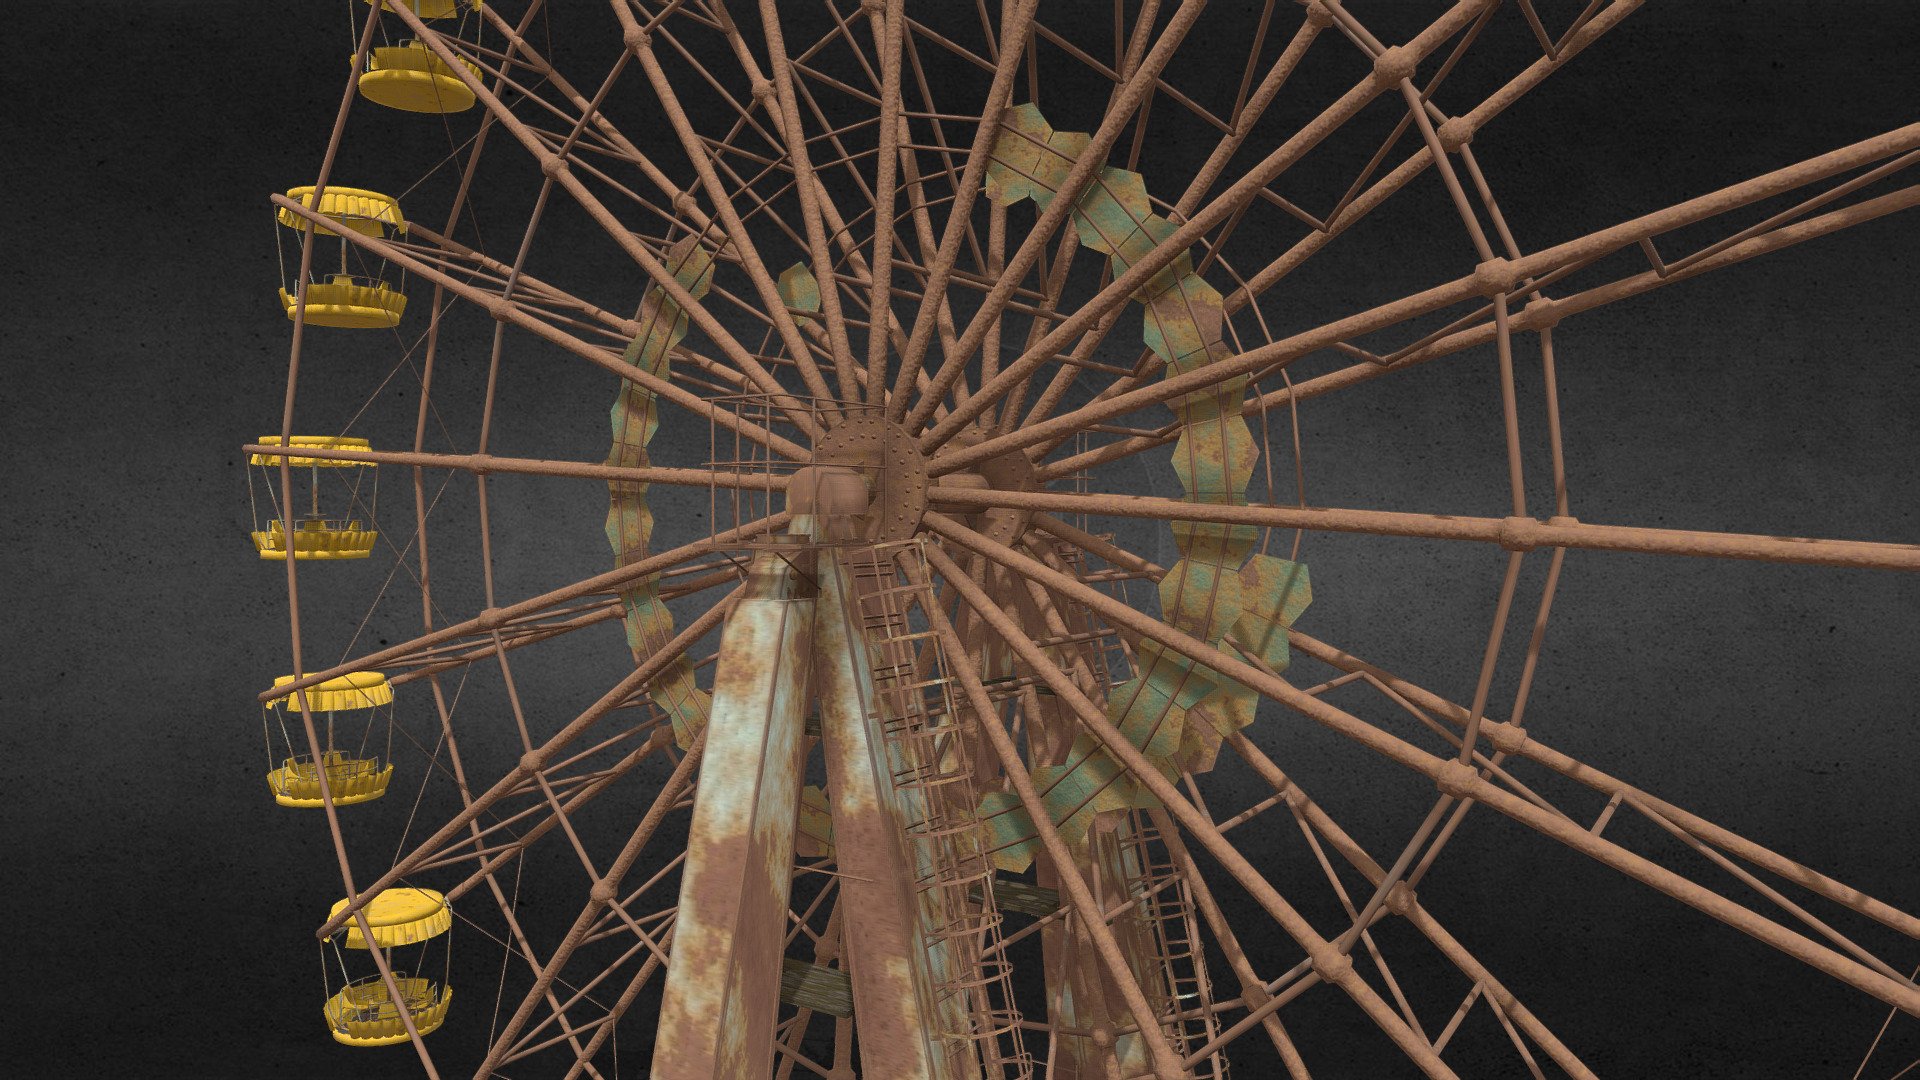 Model of the pripyat ferris wheel .In this project, I studied many details from dozens of videos and photos to make the Ferris wheel look as accurate as possible 3d model